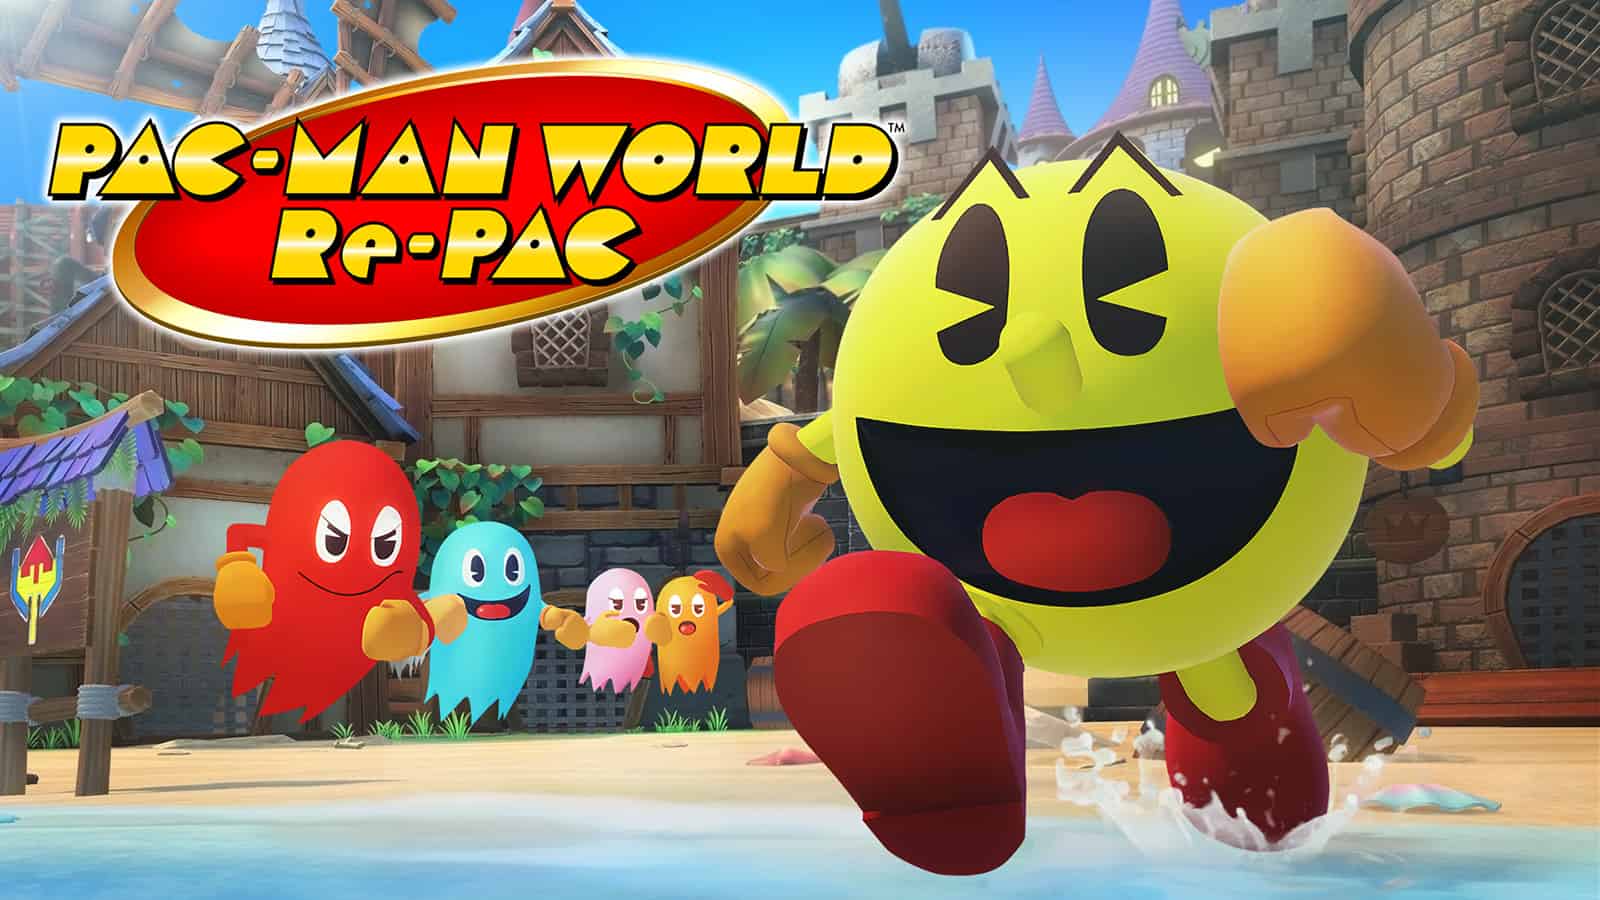 Pac-Man World Re-Pac Announced For PlayStation, Xbox, Switch & PC